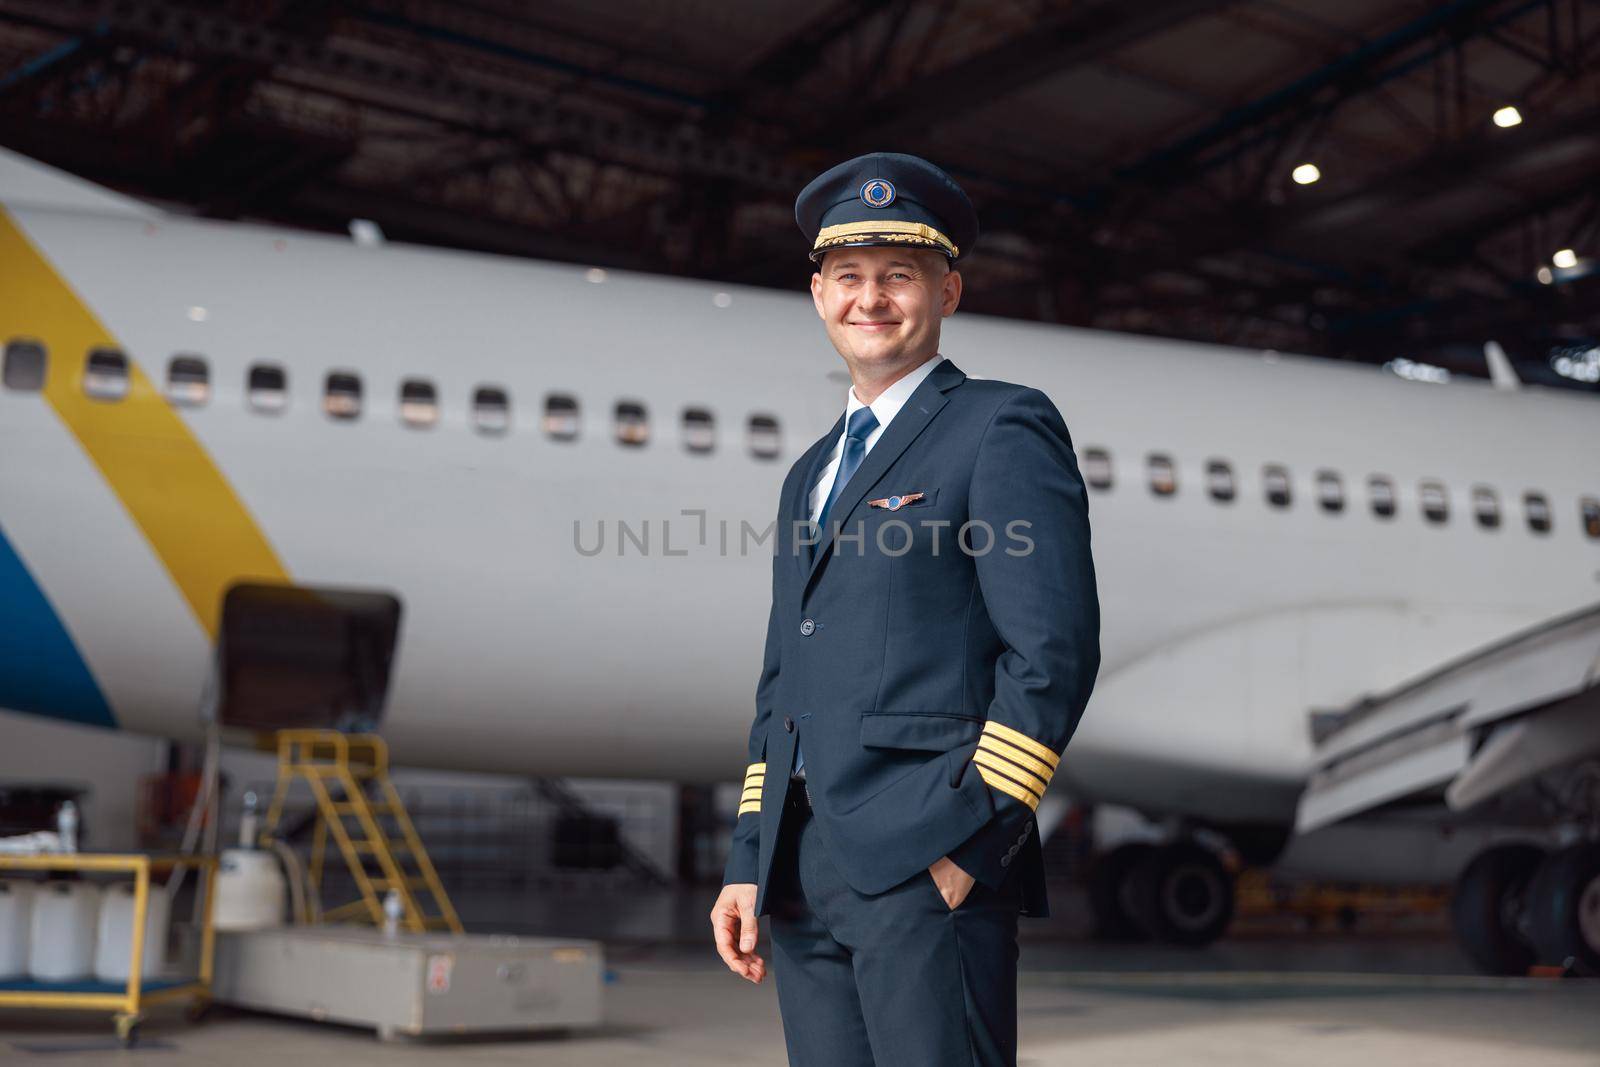 Portrait of smiling pilot in uniform looking at camera, standing in front of big passenger airplane in airport hangar. Aircraft, occupation, transportation concept